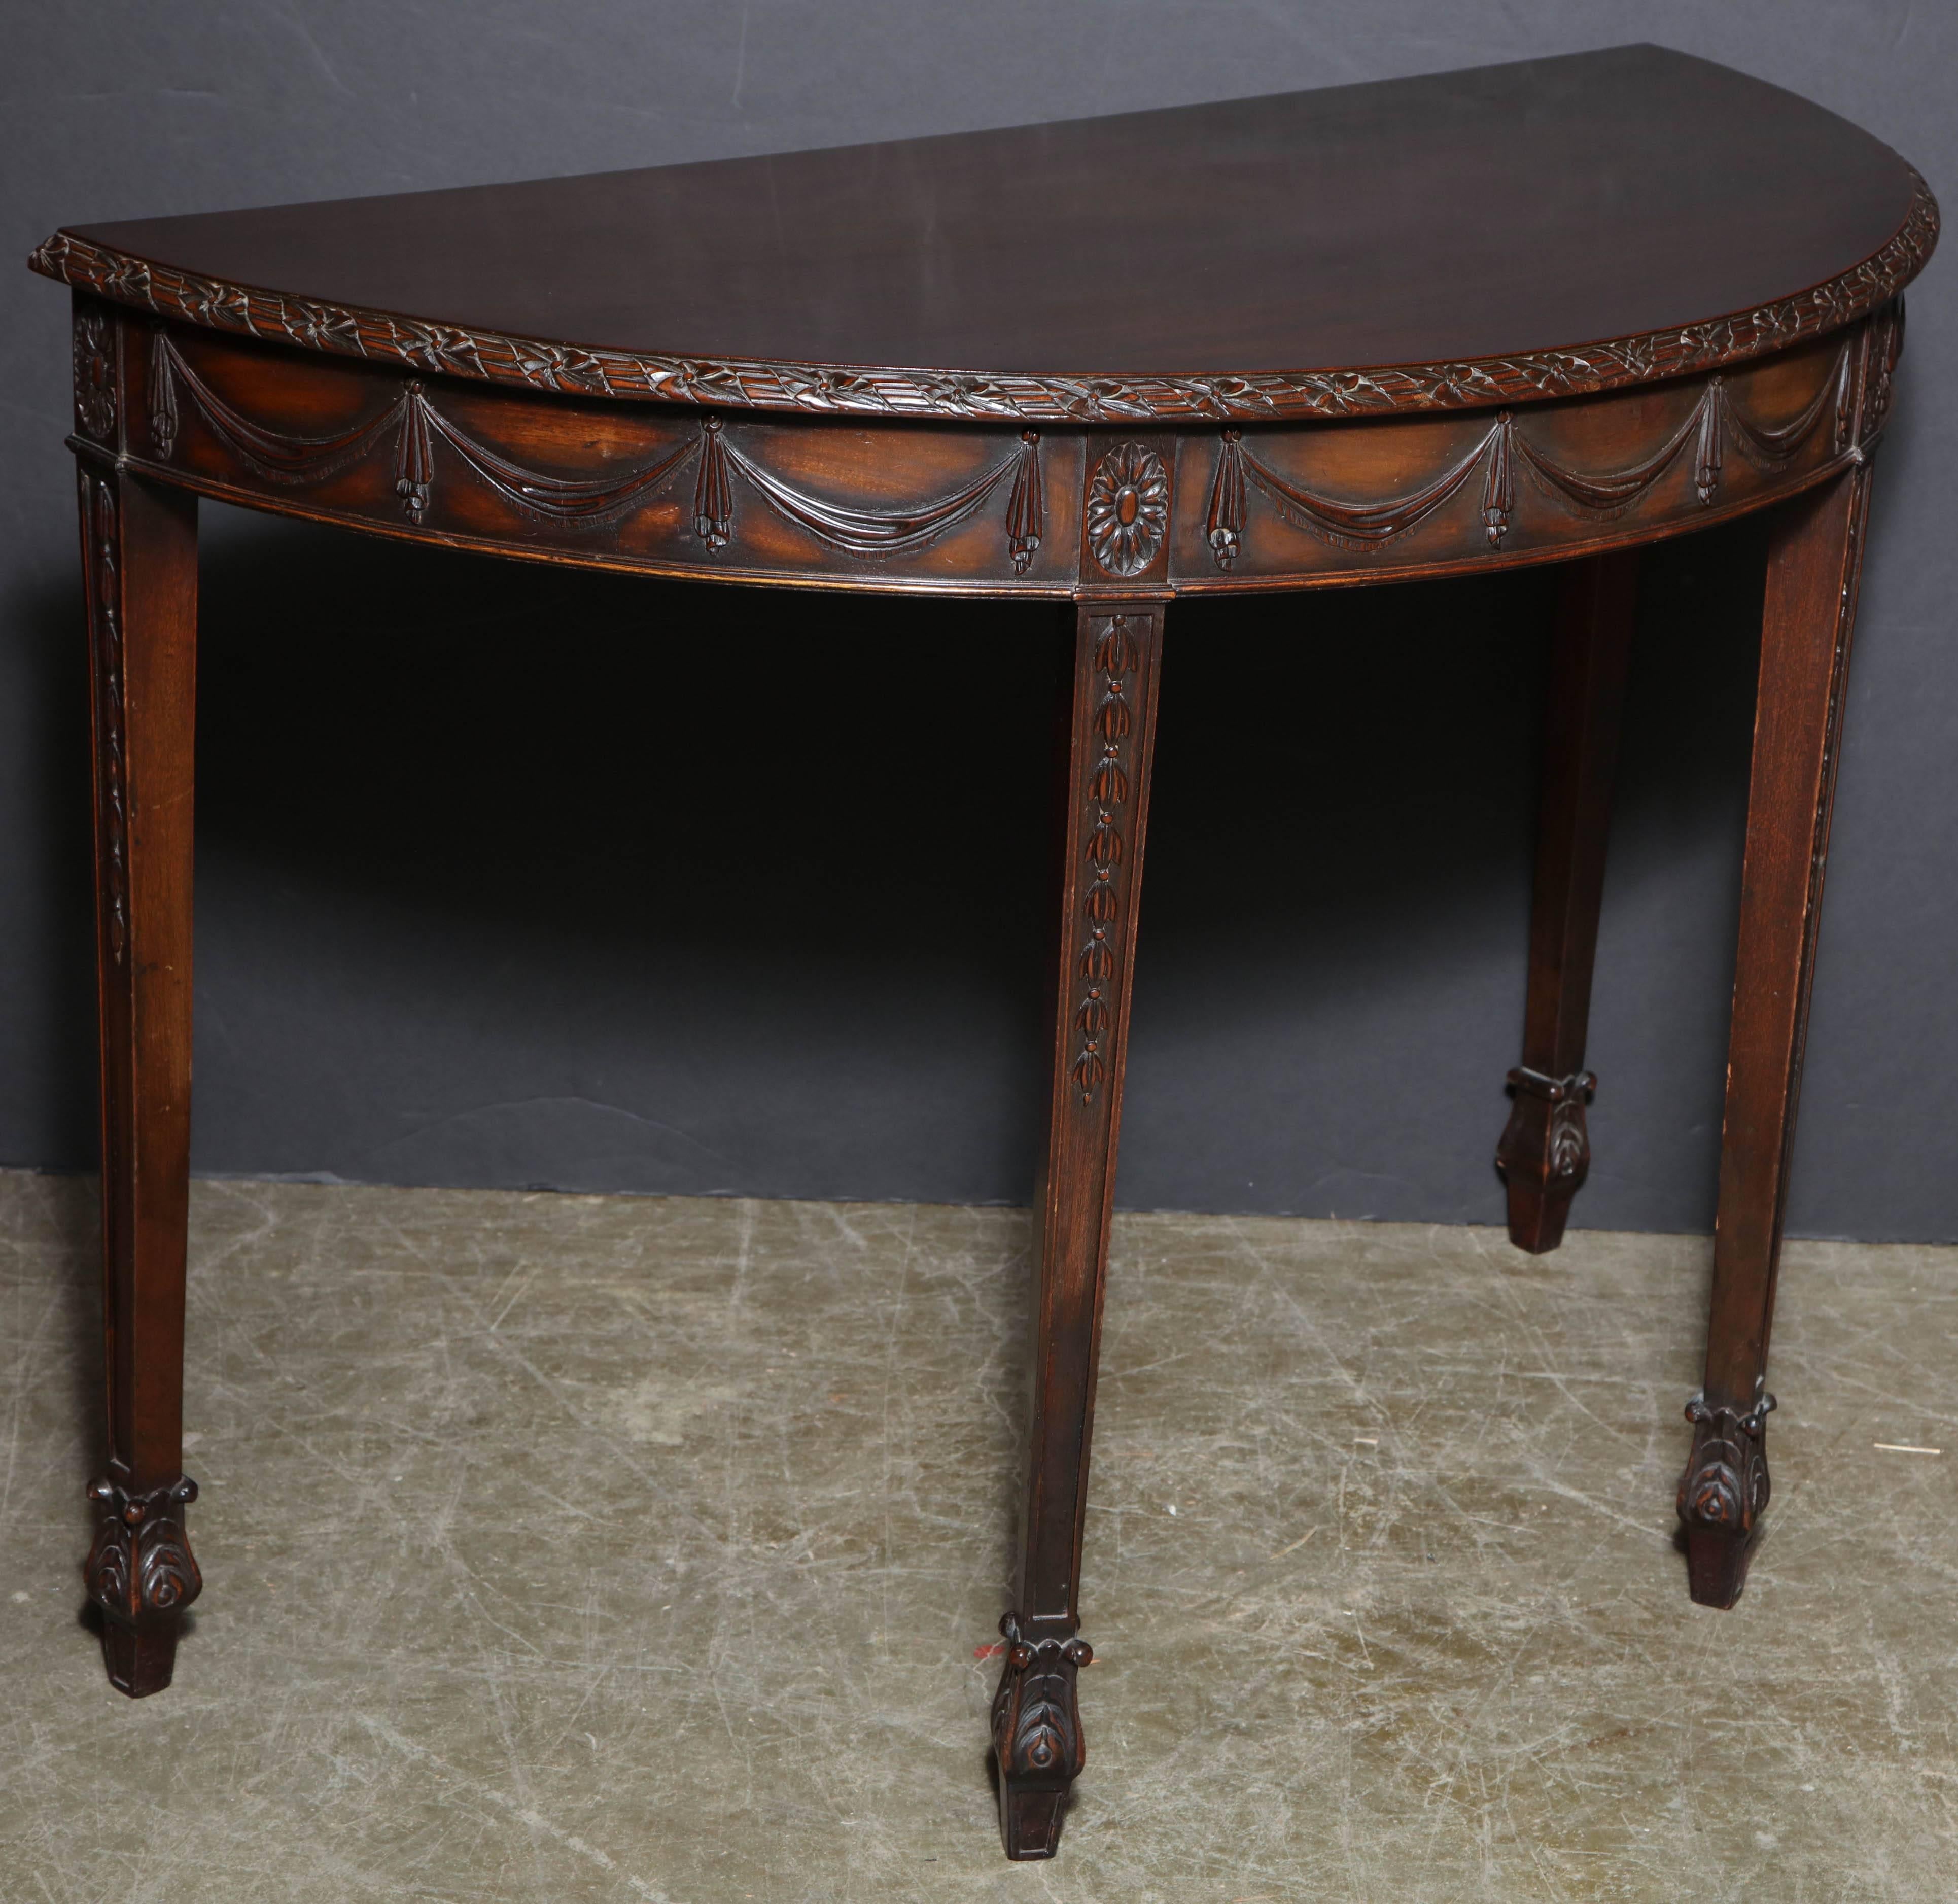 Pair of English George III carved mahogany demilune console table with ribbon and blossom edge, drapery carved aprons, carved bell flower tapered legs on unusual spade feet.